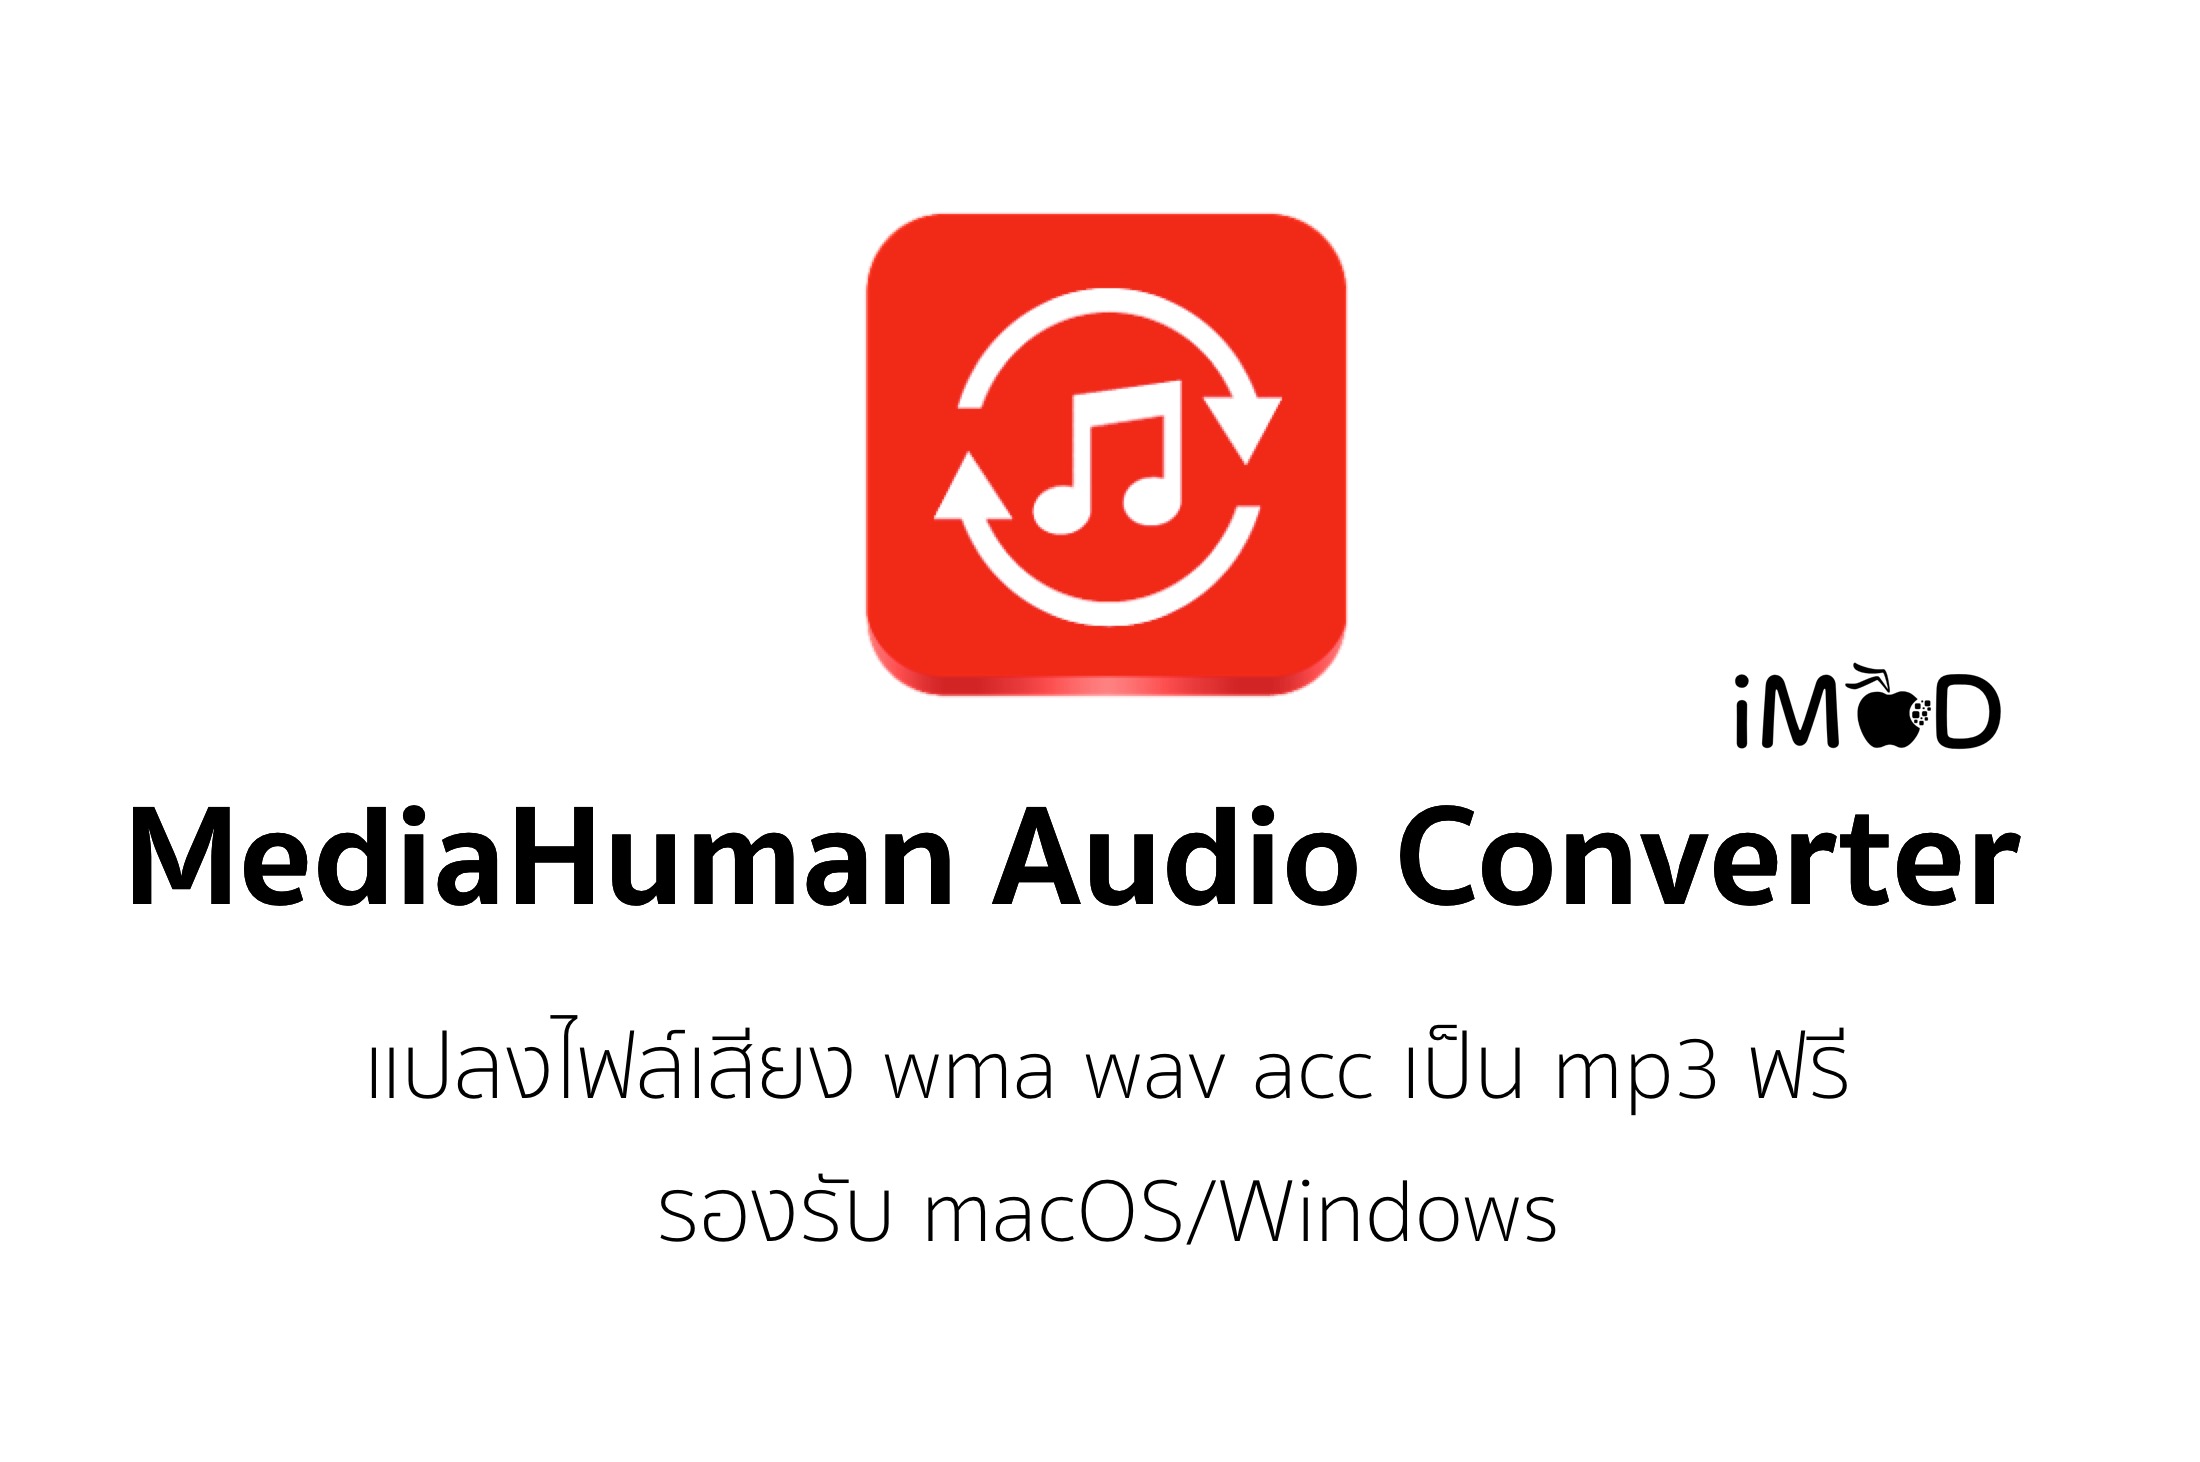 download the last version for windows MediaHuman YouTube to MP3 Converter 3.9.9.83.2506